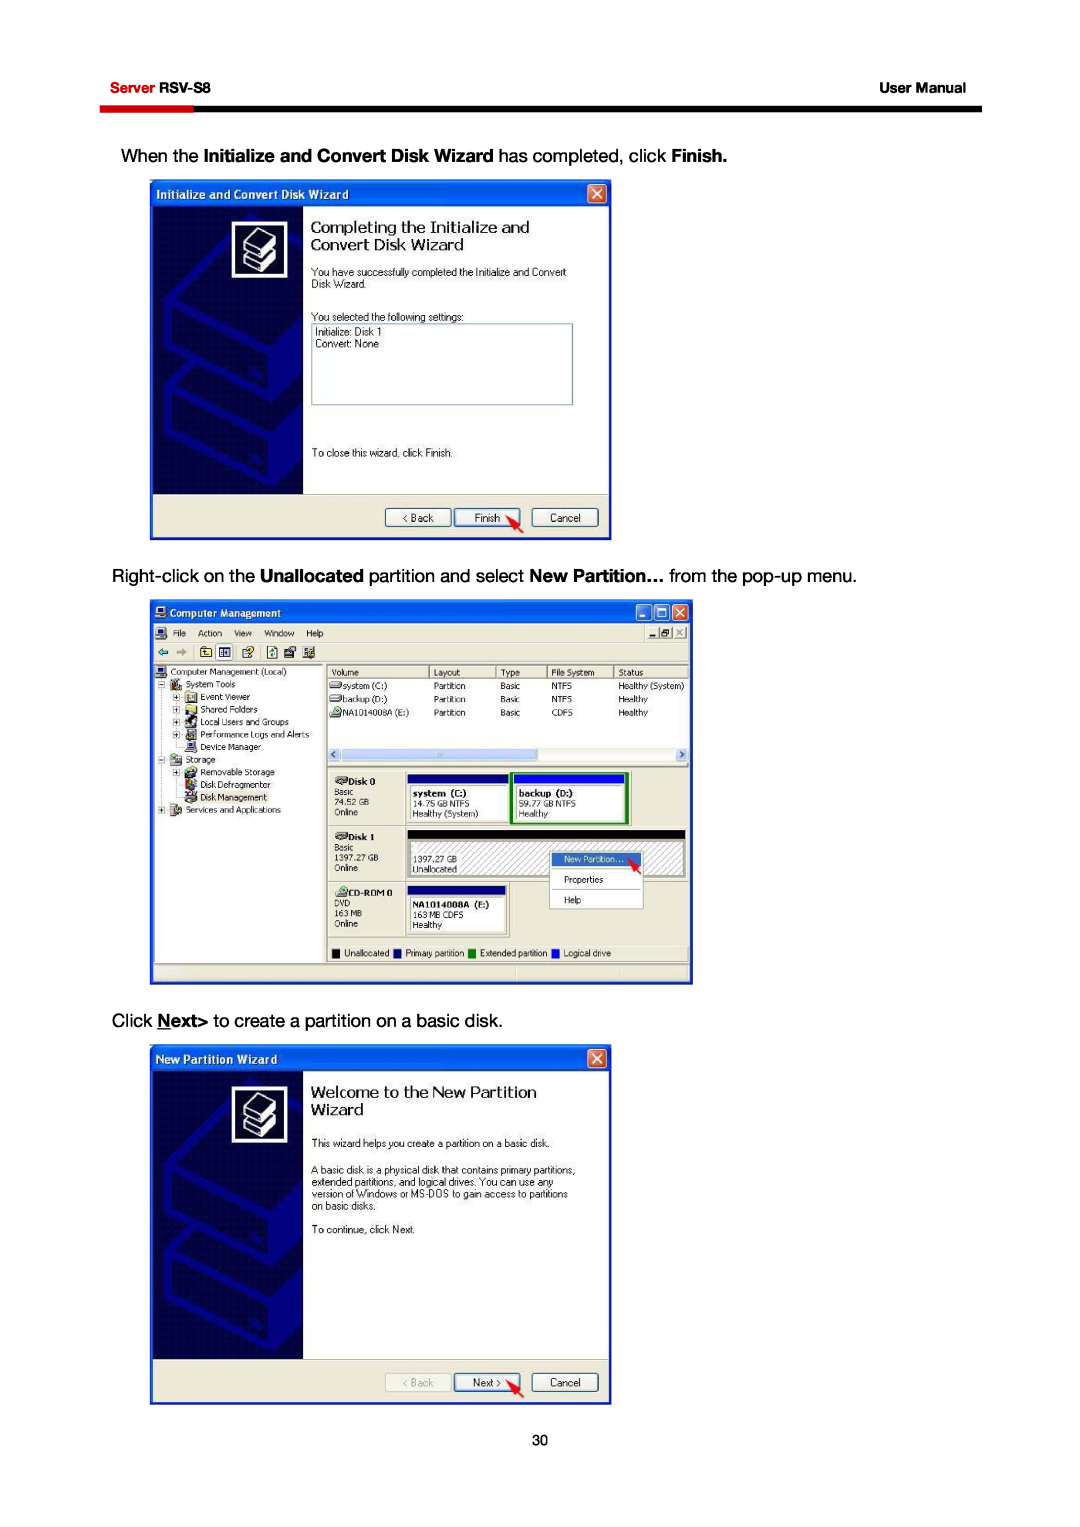 Rosewill user manual Click Next to create a partition on a basic disk, Server RSV-S8, User Manual 